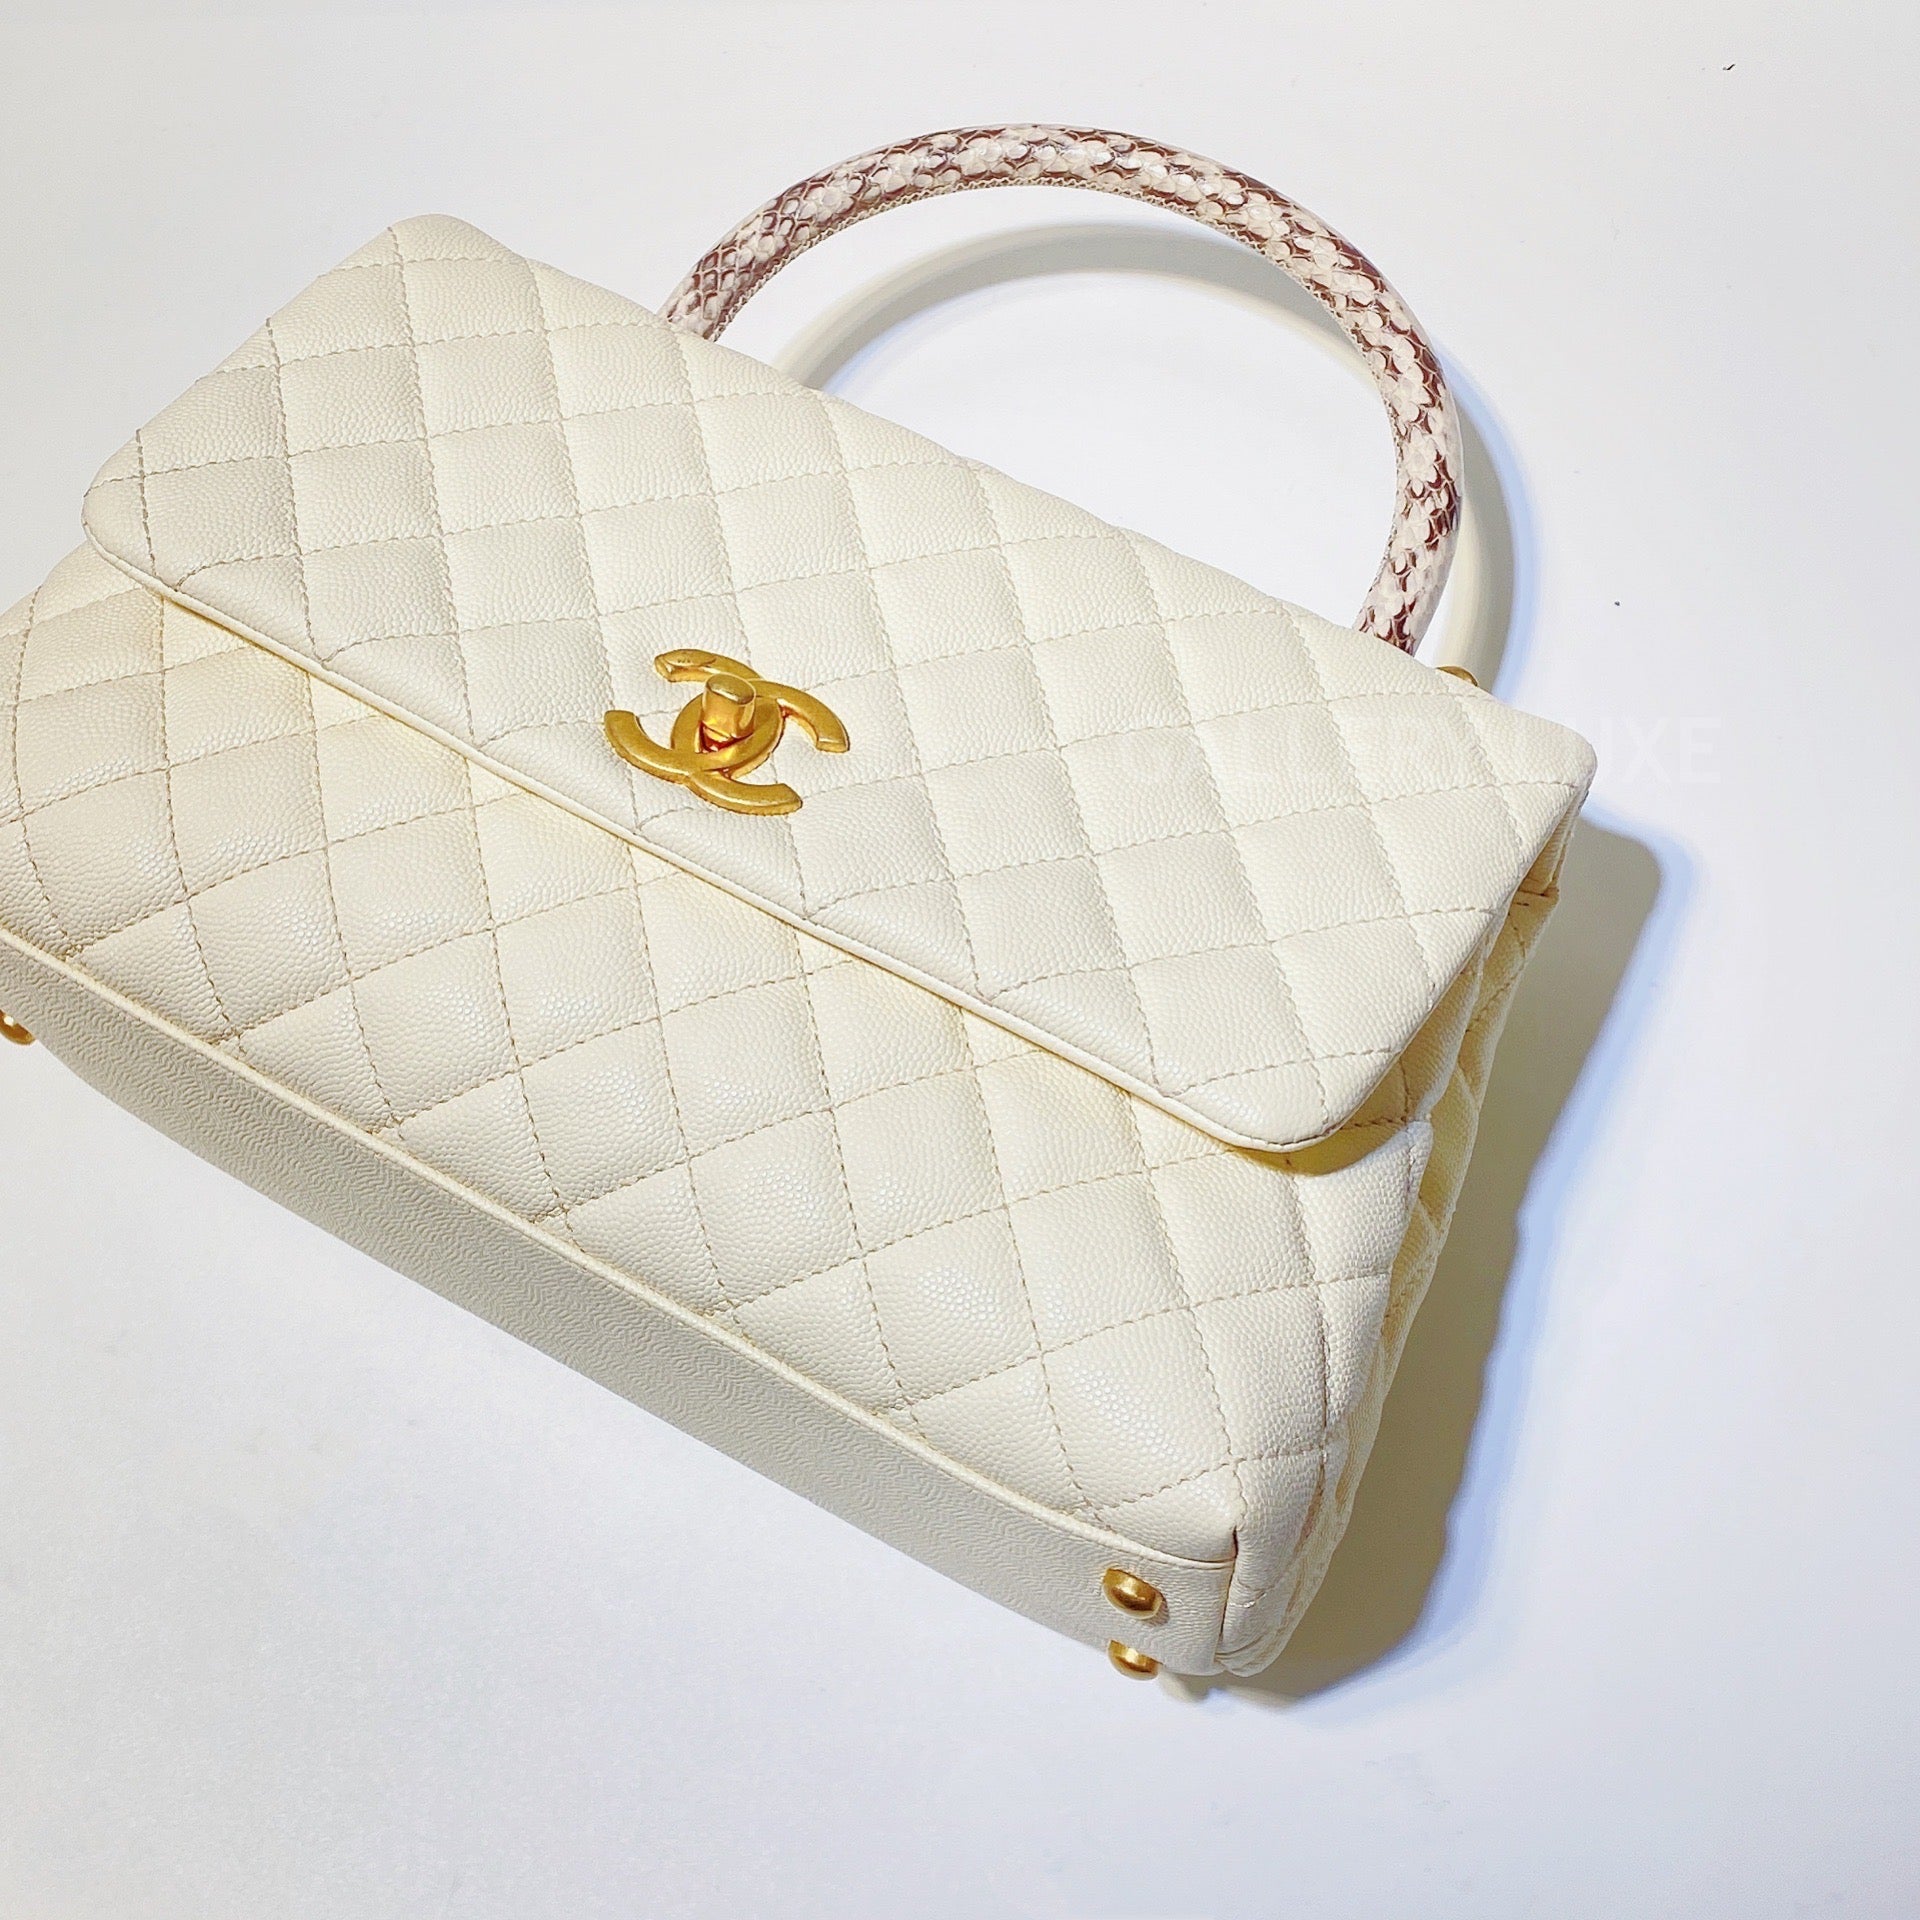 Chanel Coco Curve Ivory Flap Bag